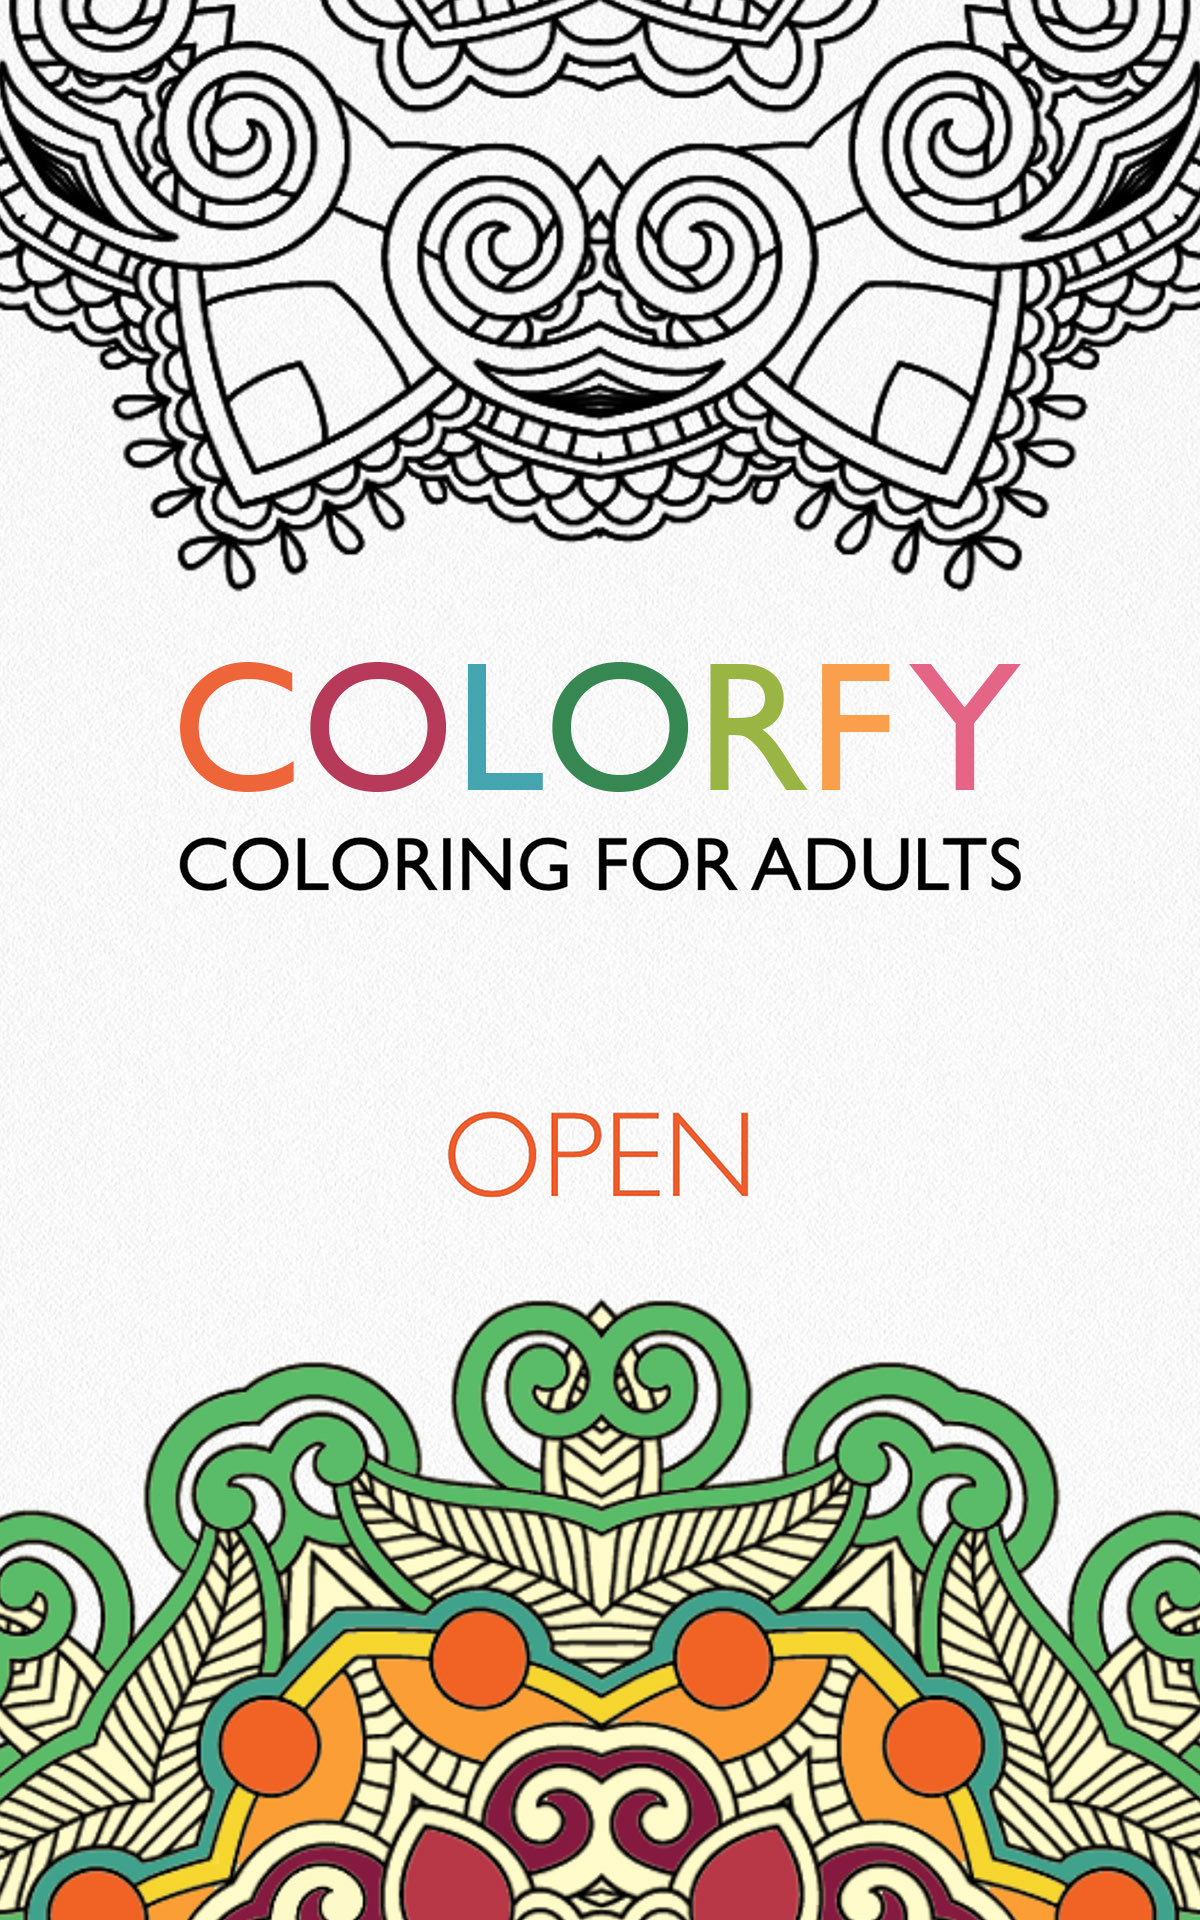 Adult Coloring Book Amazon
 Amazon Colorfy Coloring Book for Adults Free